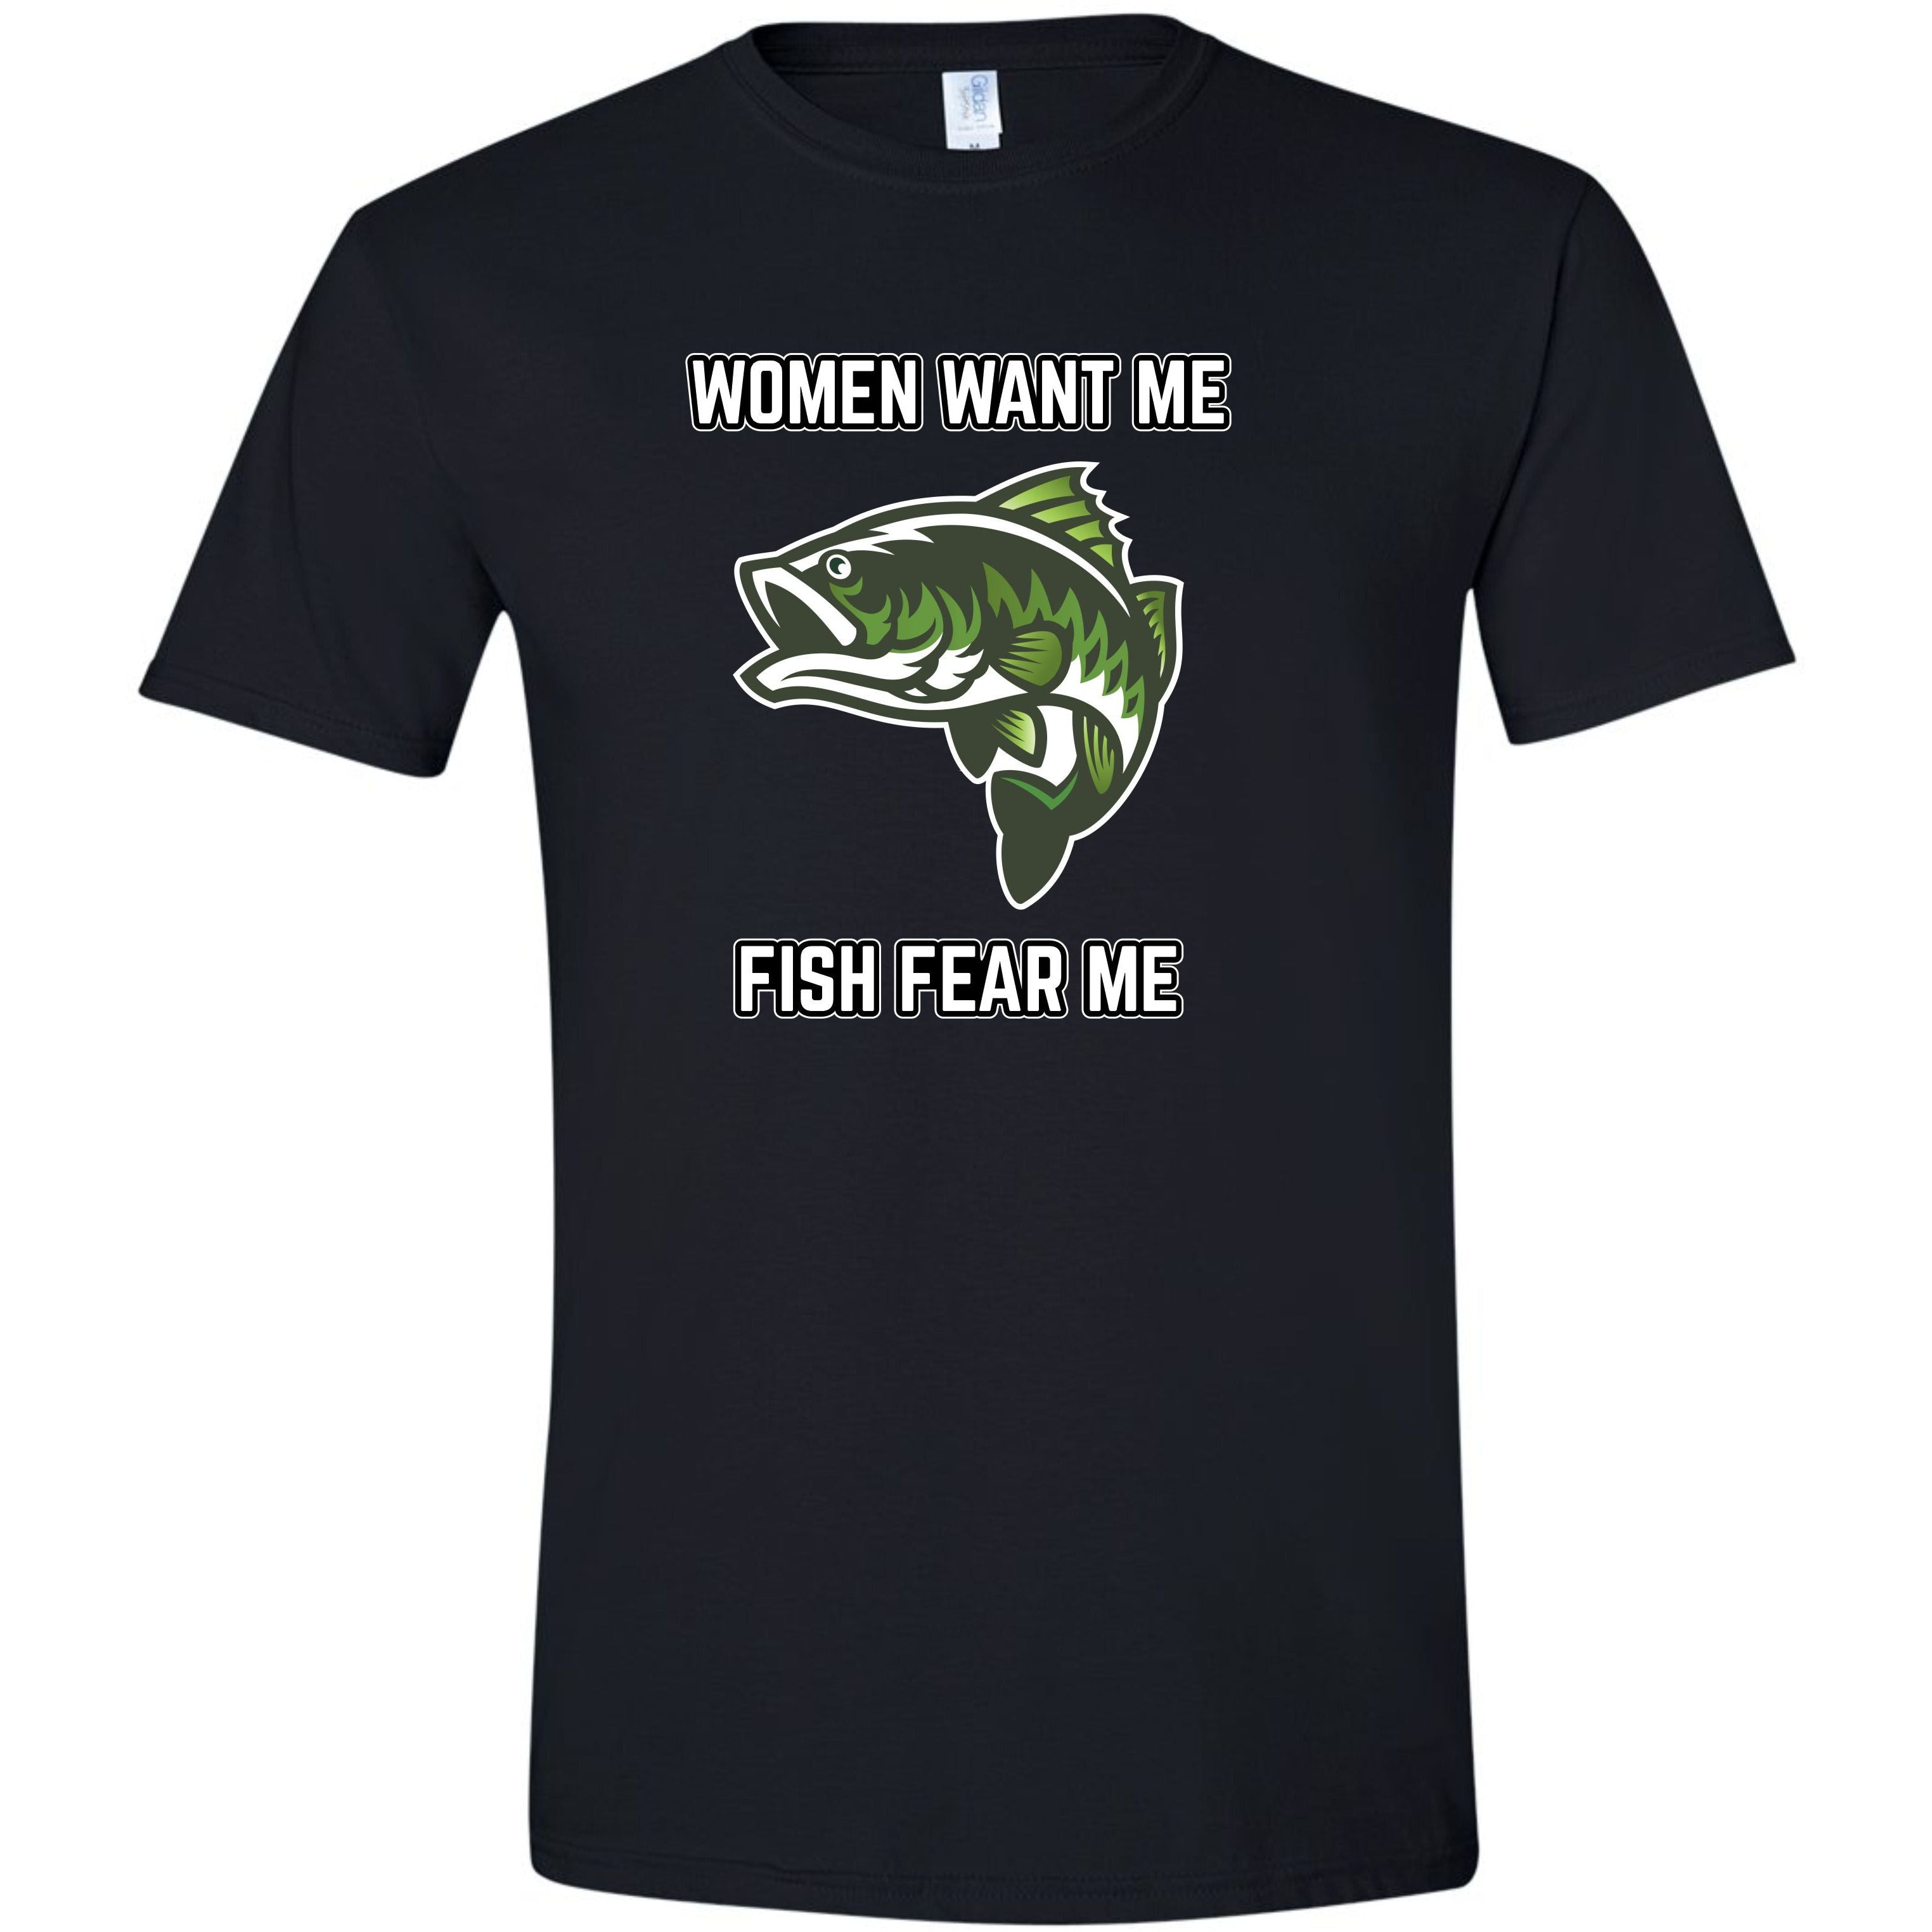 Women Want Me Fish Fear Me Funny T Shirt, Small / Black